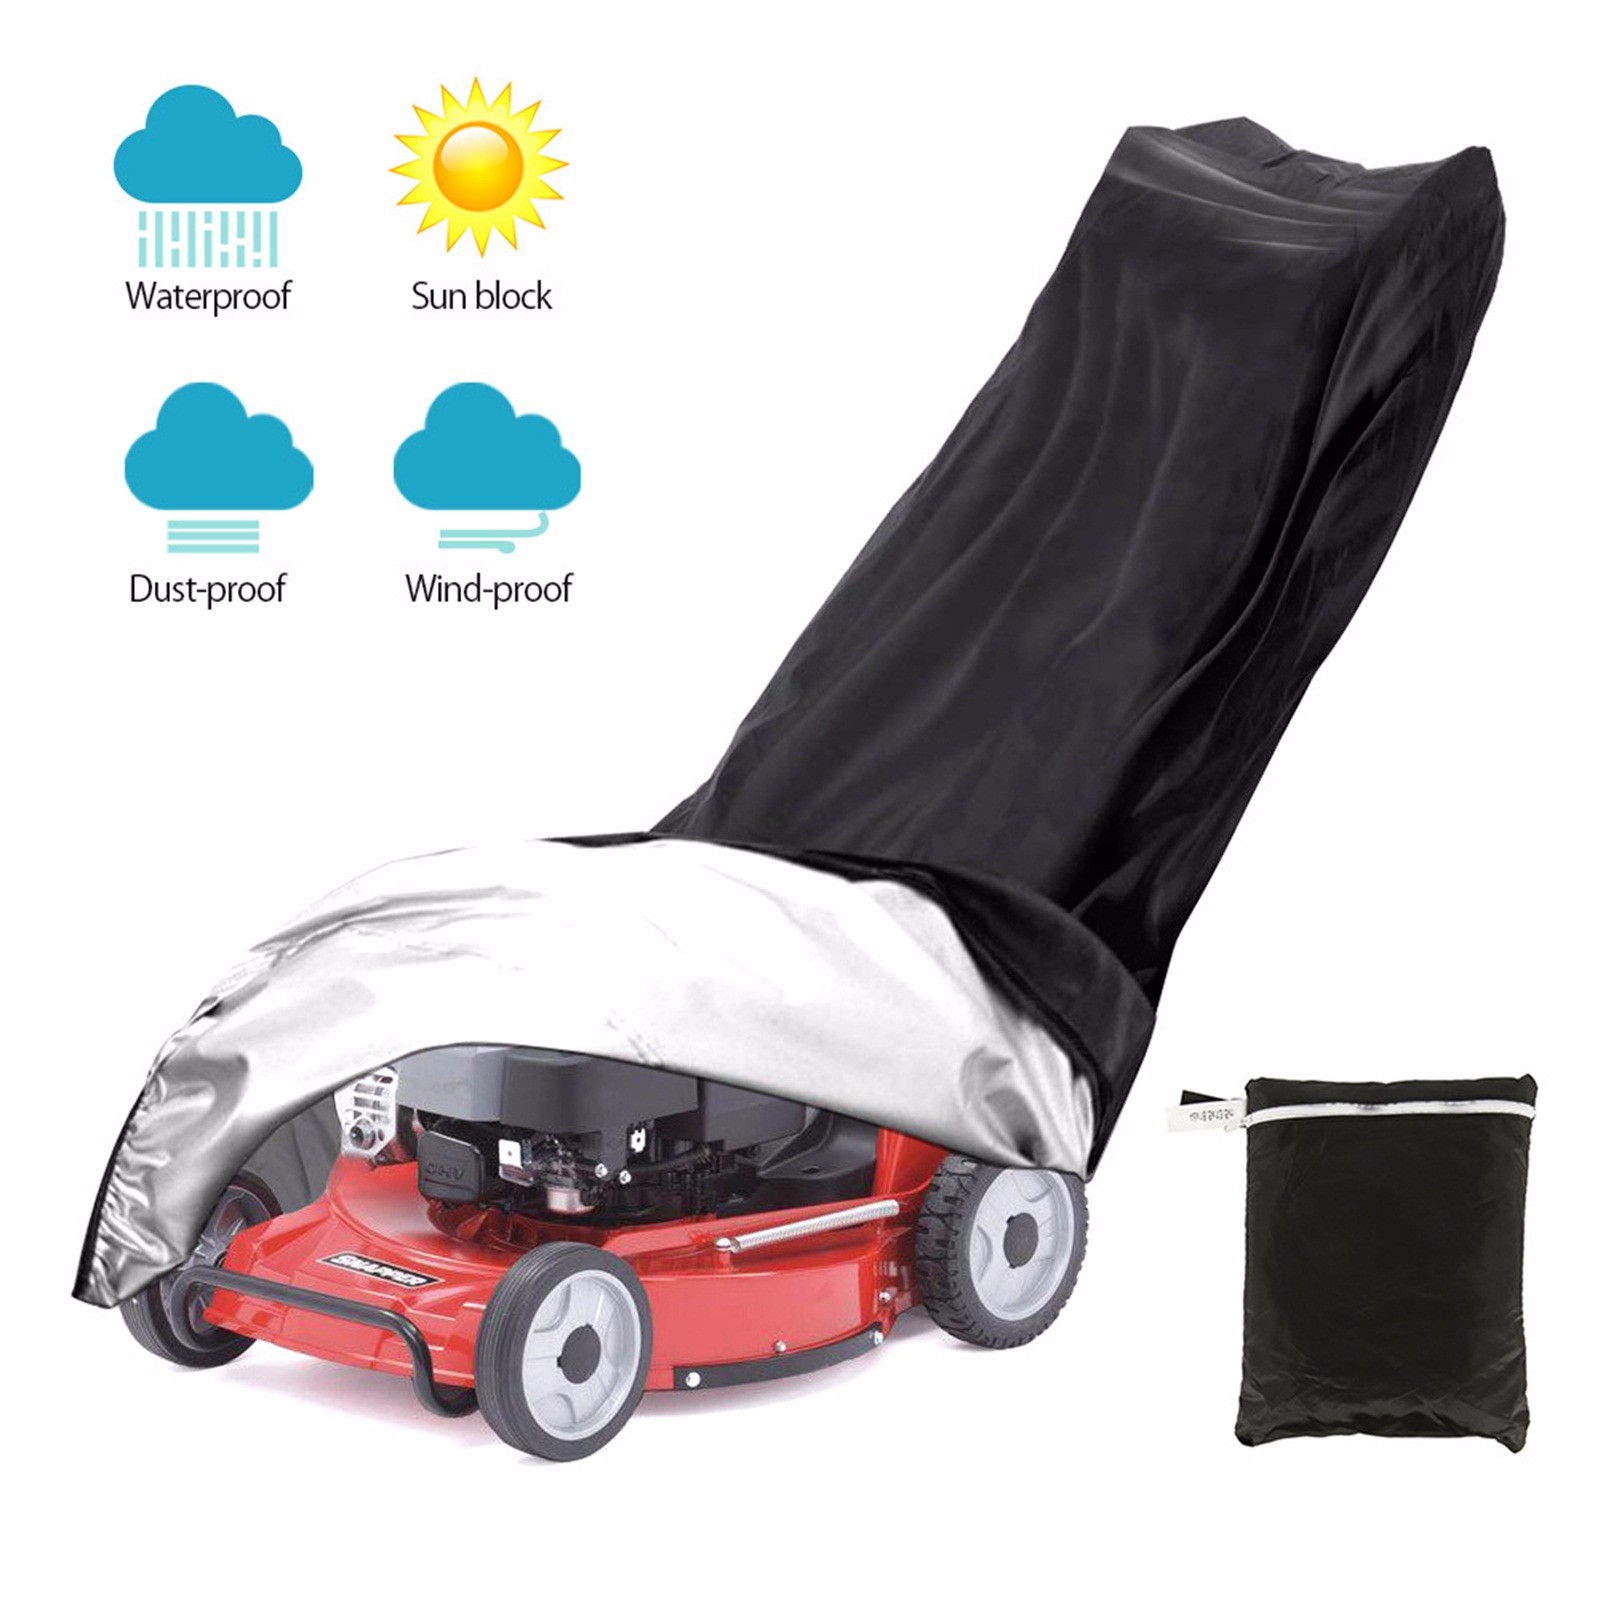 WANYNG Protective Cover for Protector Fit Mower Universal Push Lawn  Waterproof Mowers Cover Weather Patio Lawn  Garden Dust cover Multicolor -  Walmart.com